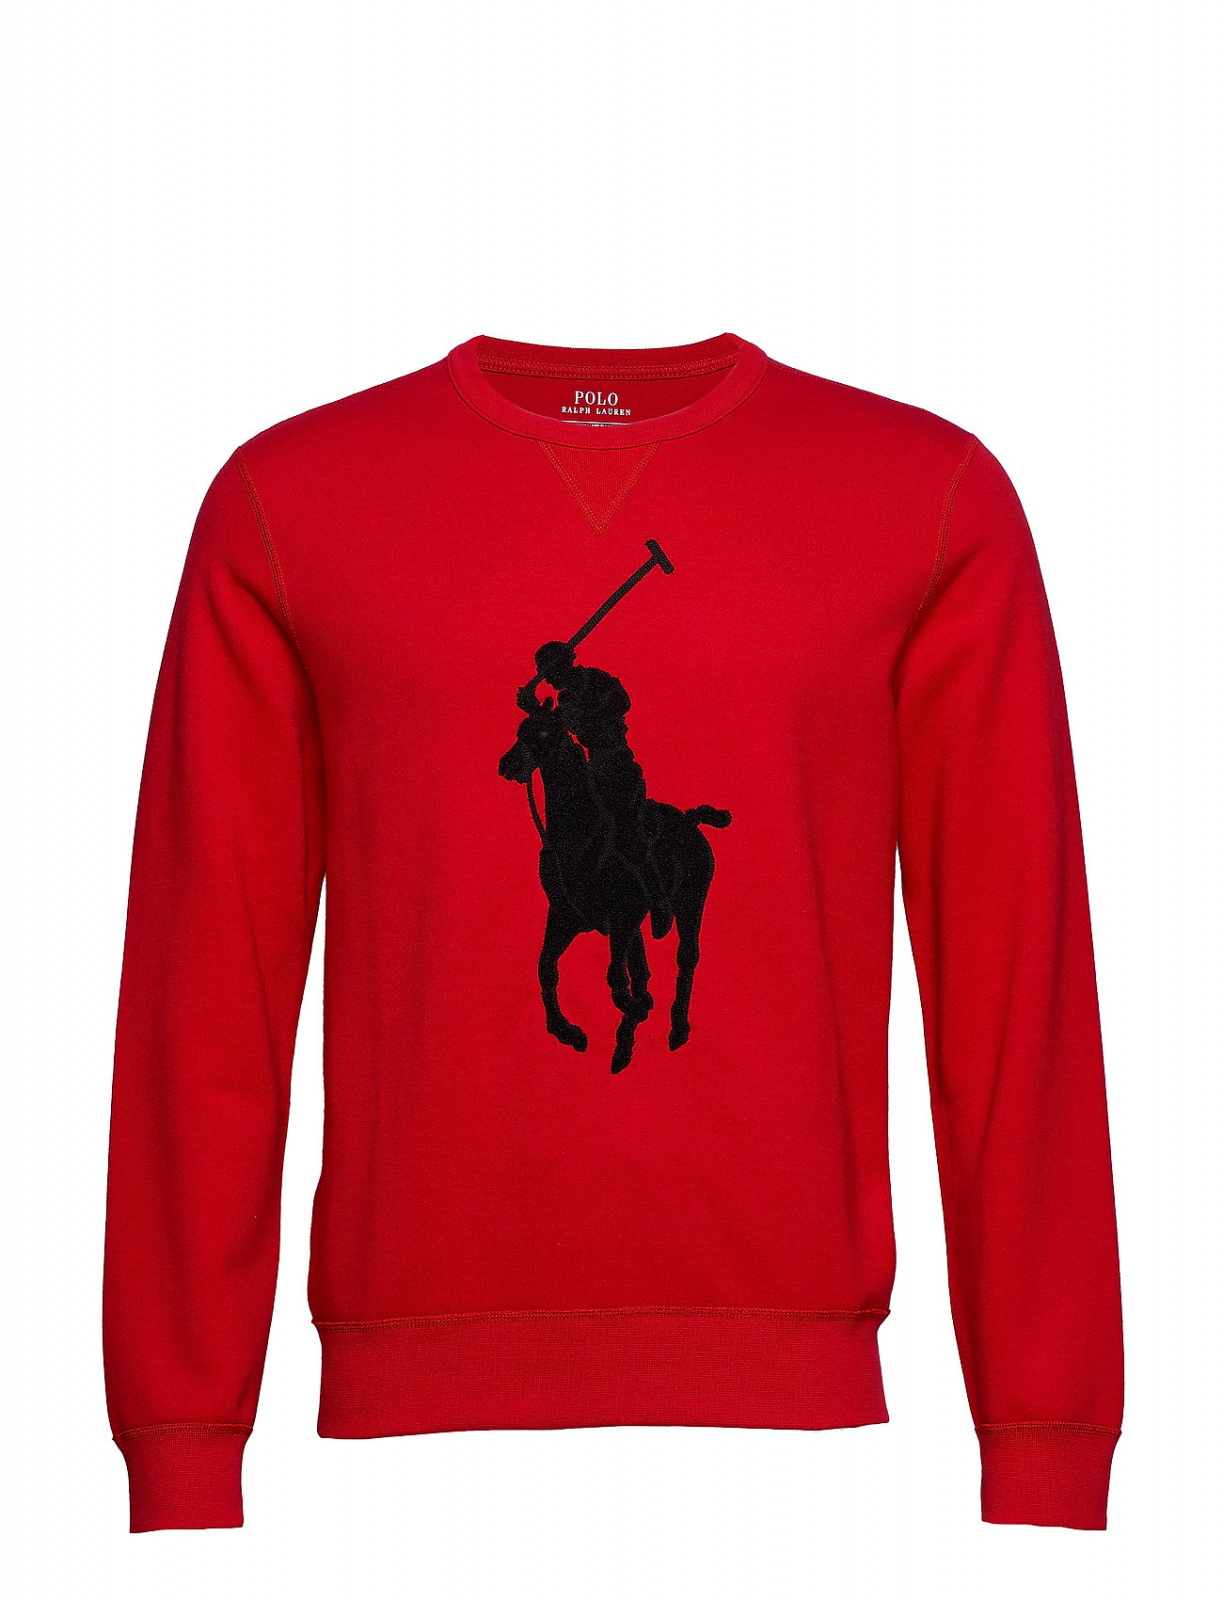 Polo Ralph Lauren Sweatshirt In Red With Large Towelling Logo | vlr.eng.br